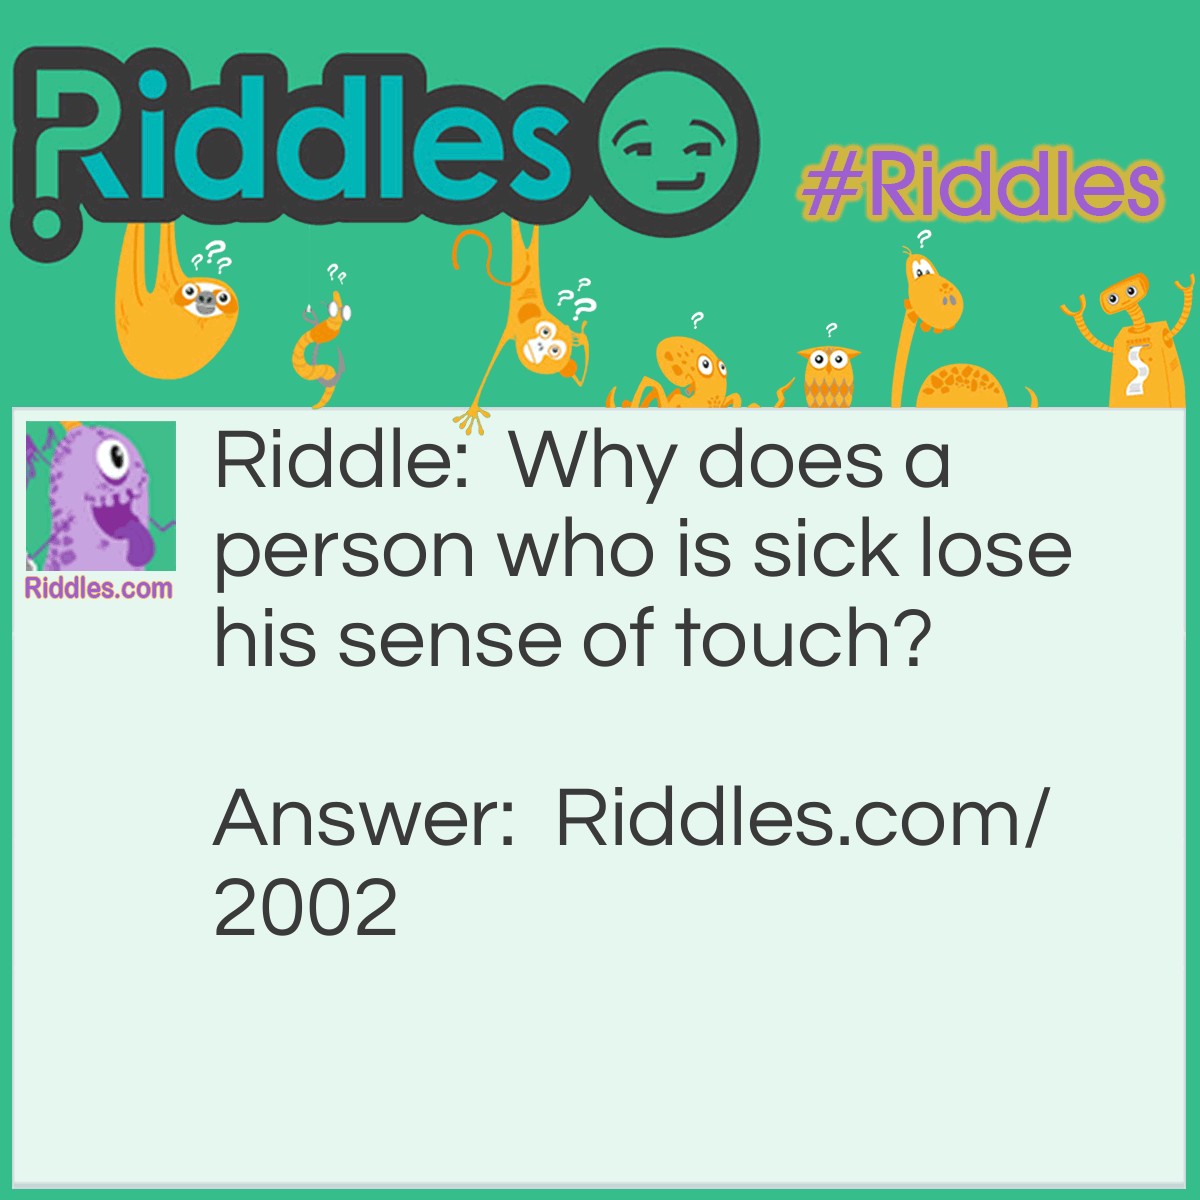 Riddle: Why does a person who is sick lose his sense of touch? Answer: Because he does not feel well.